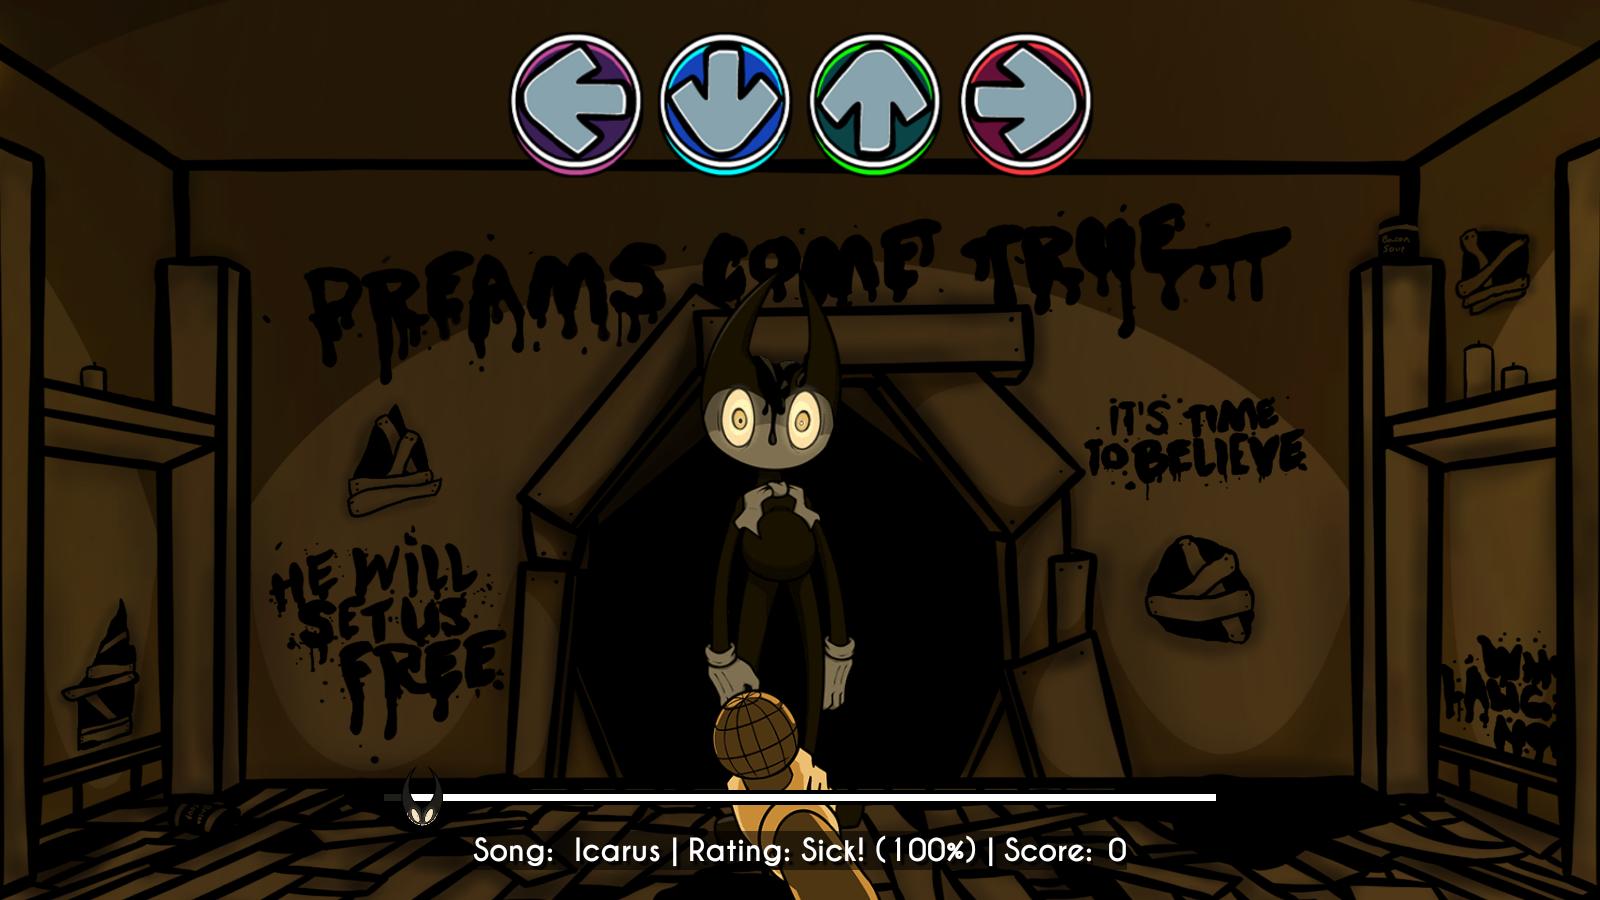 Download Bendy The Ink Machine Free for android 8.1